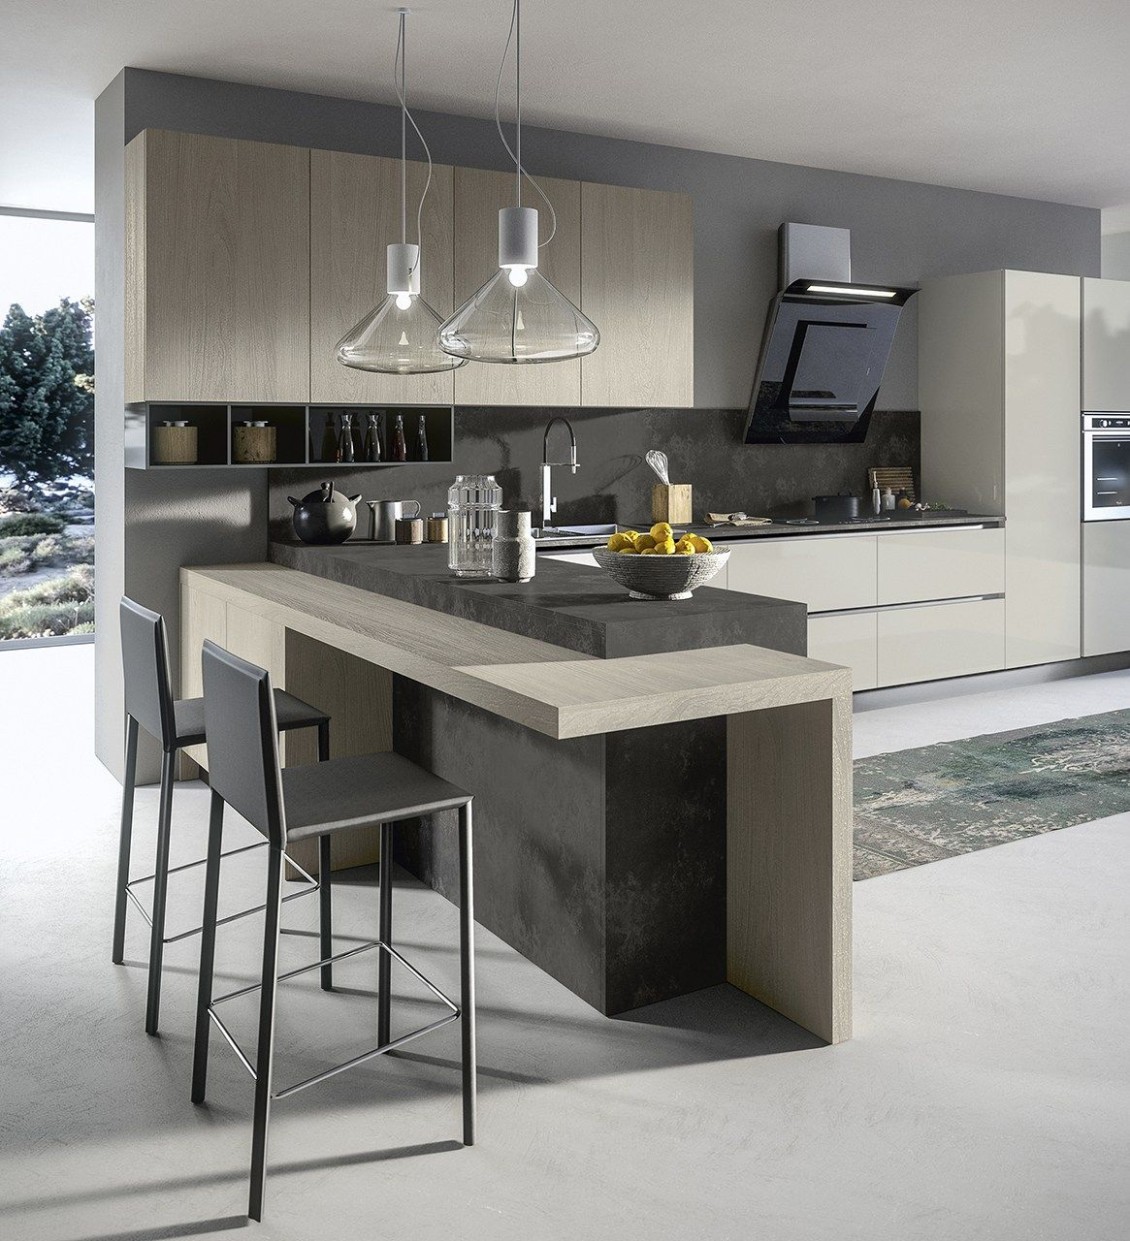 American style fitted kitchen with island with handles ROUND by  - modern american kitchen design